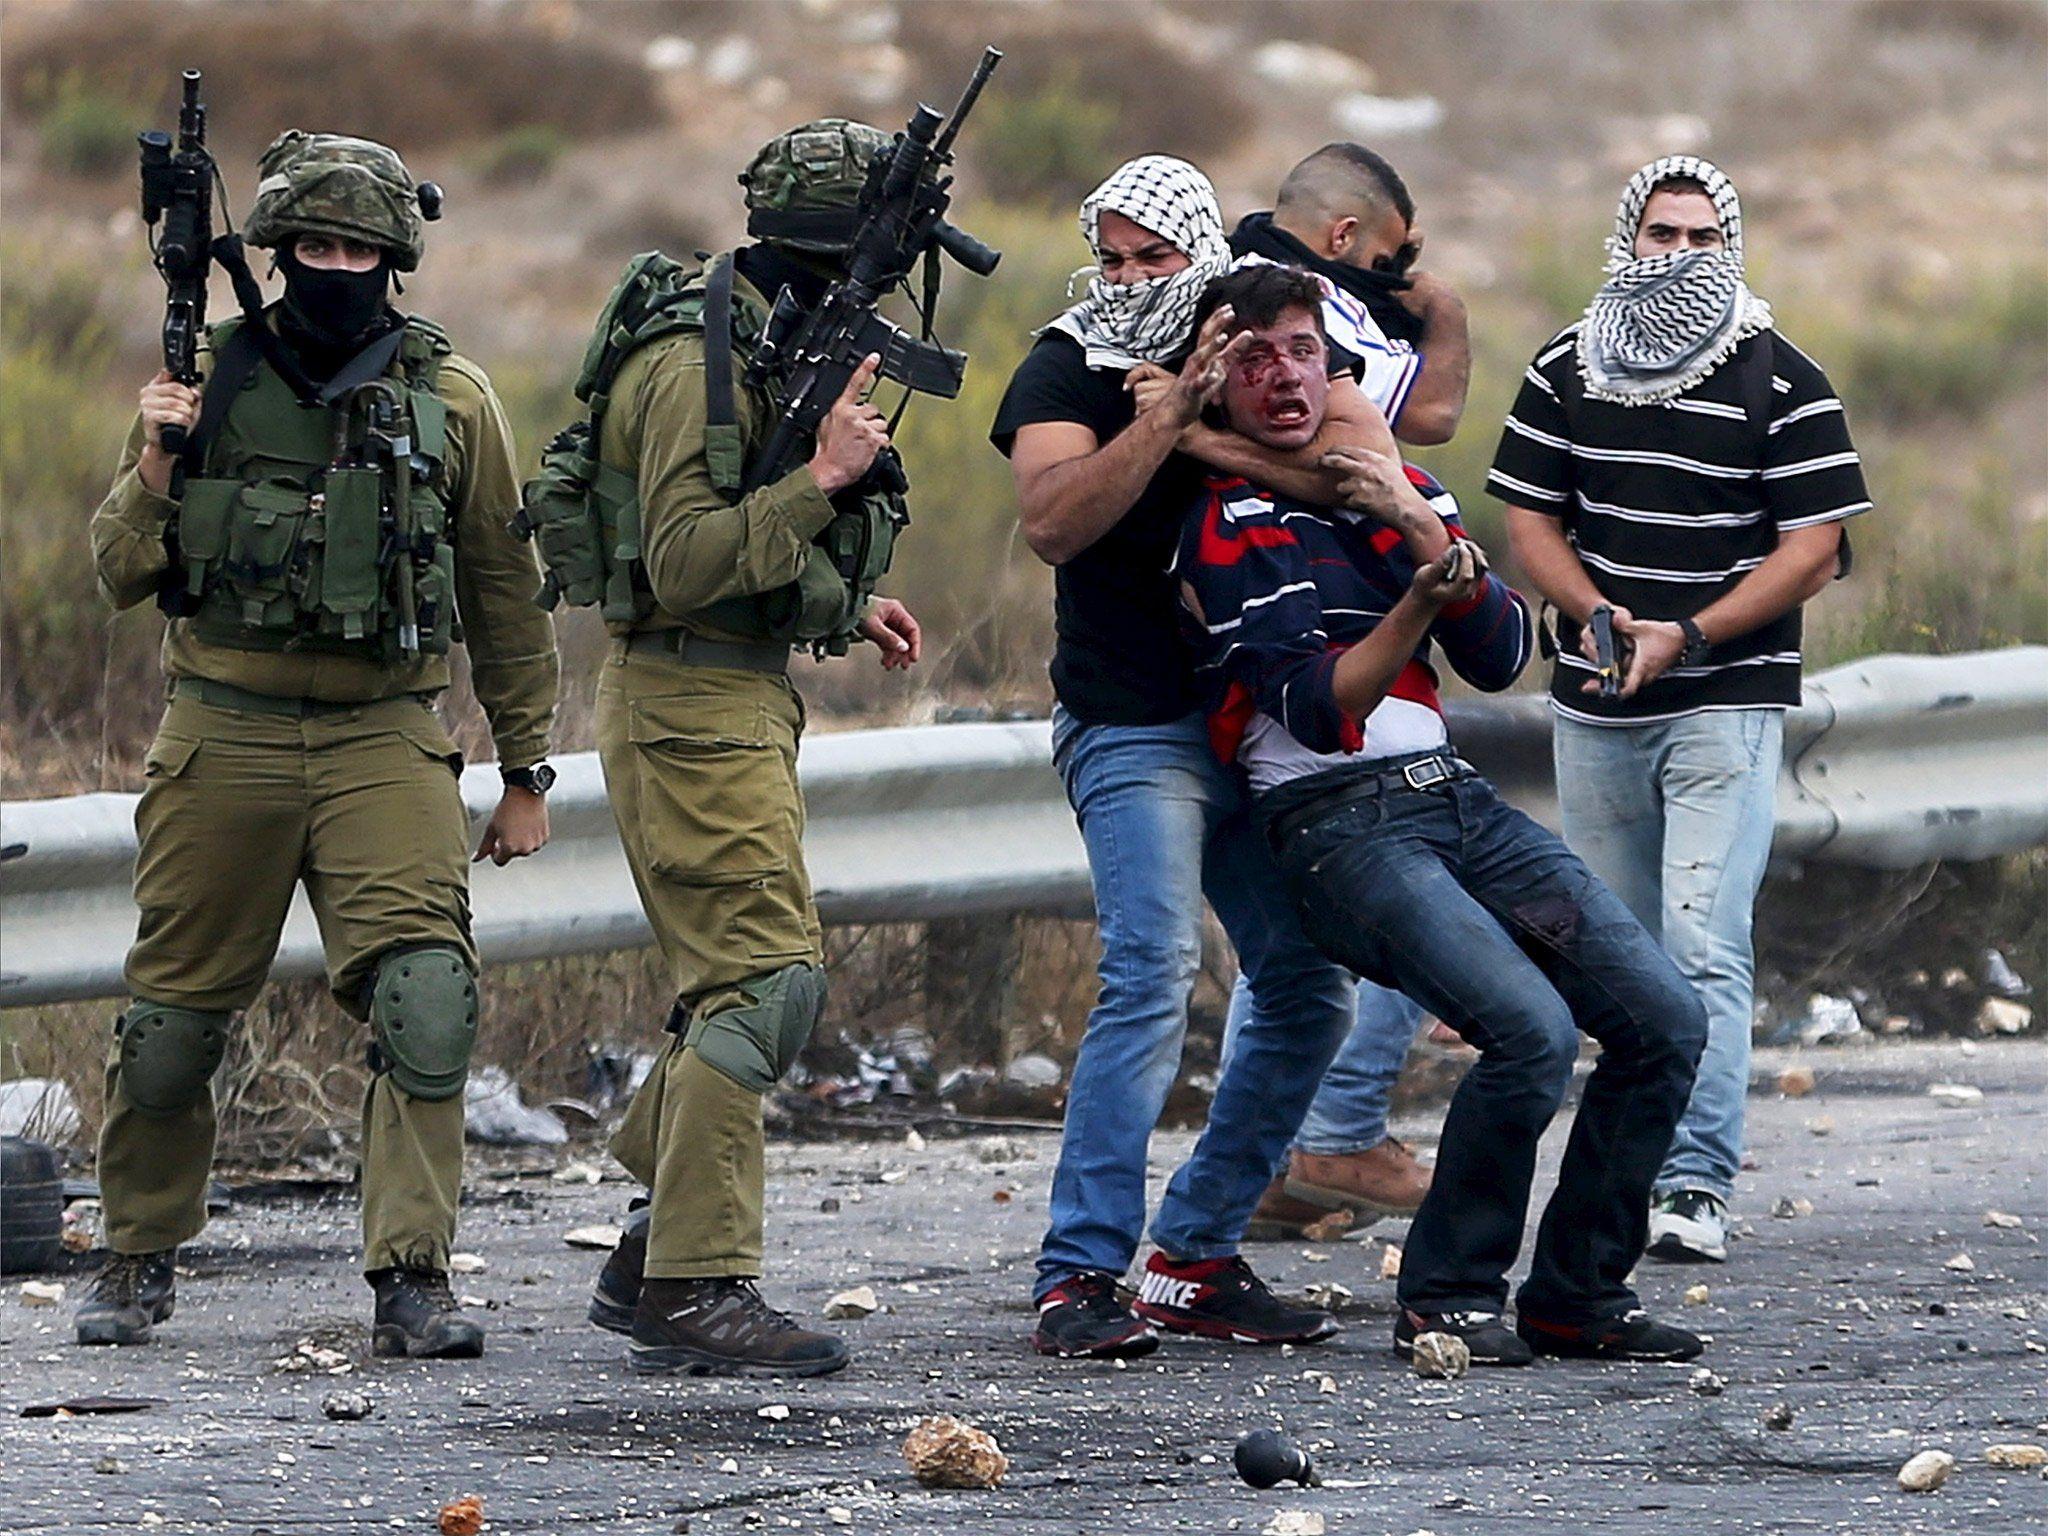 Six Palestinians killed by Israeli forces in a single day. as